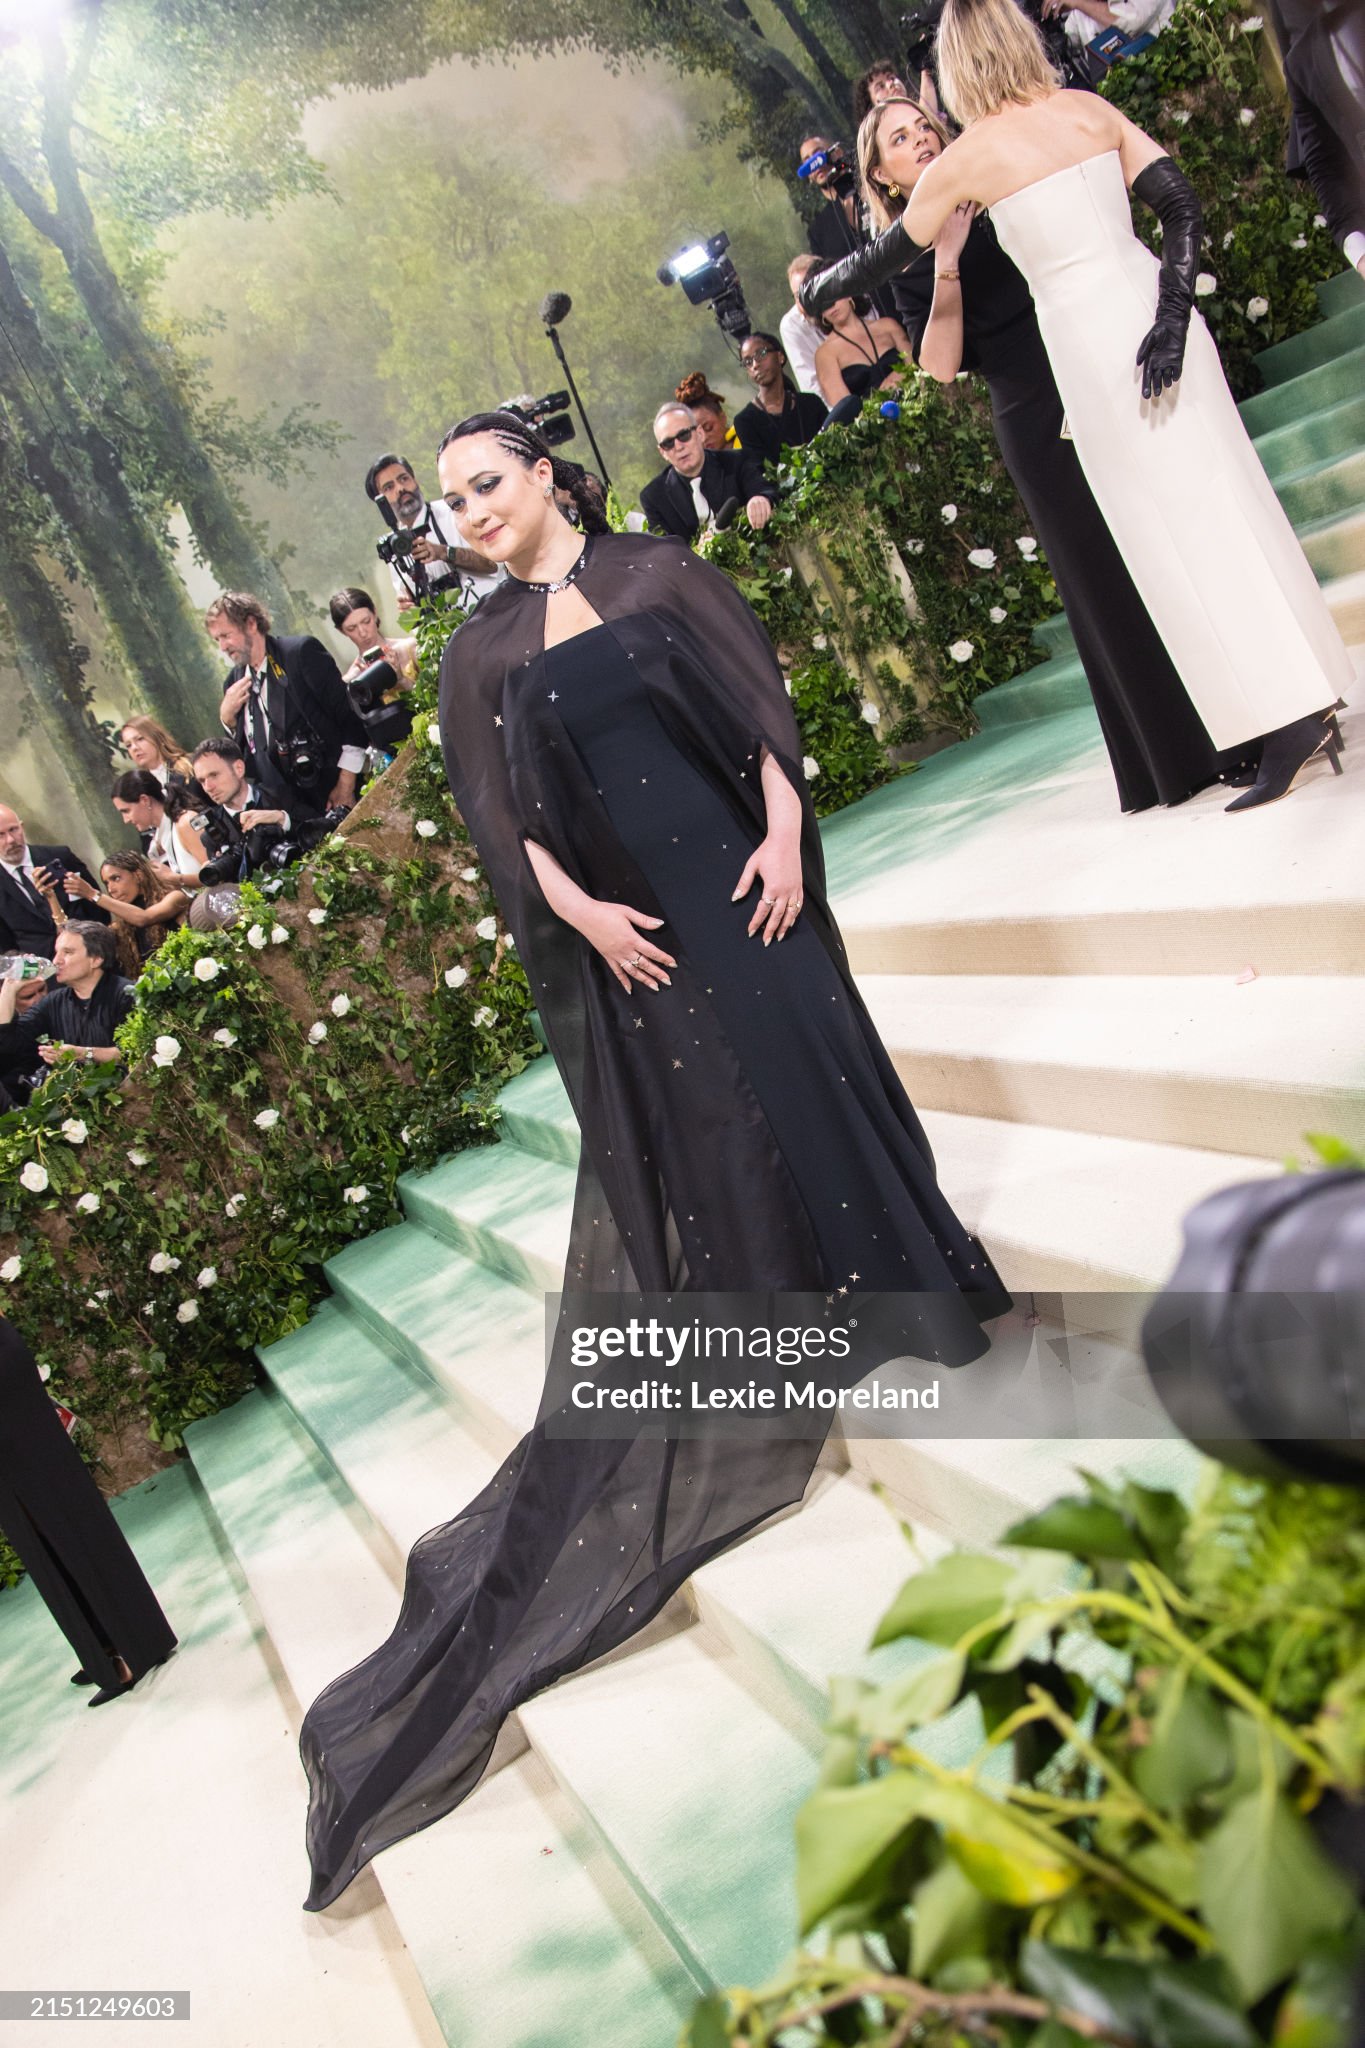 gettyimages-2151249603-2048x2048.jpg